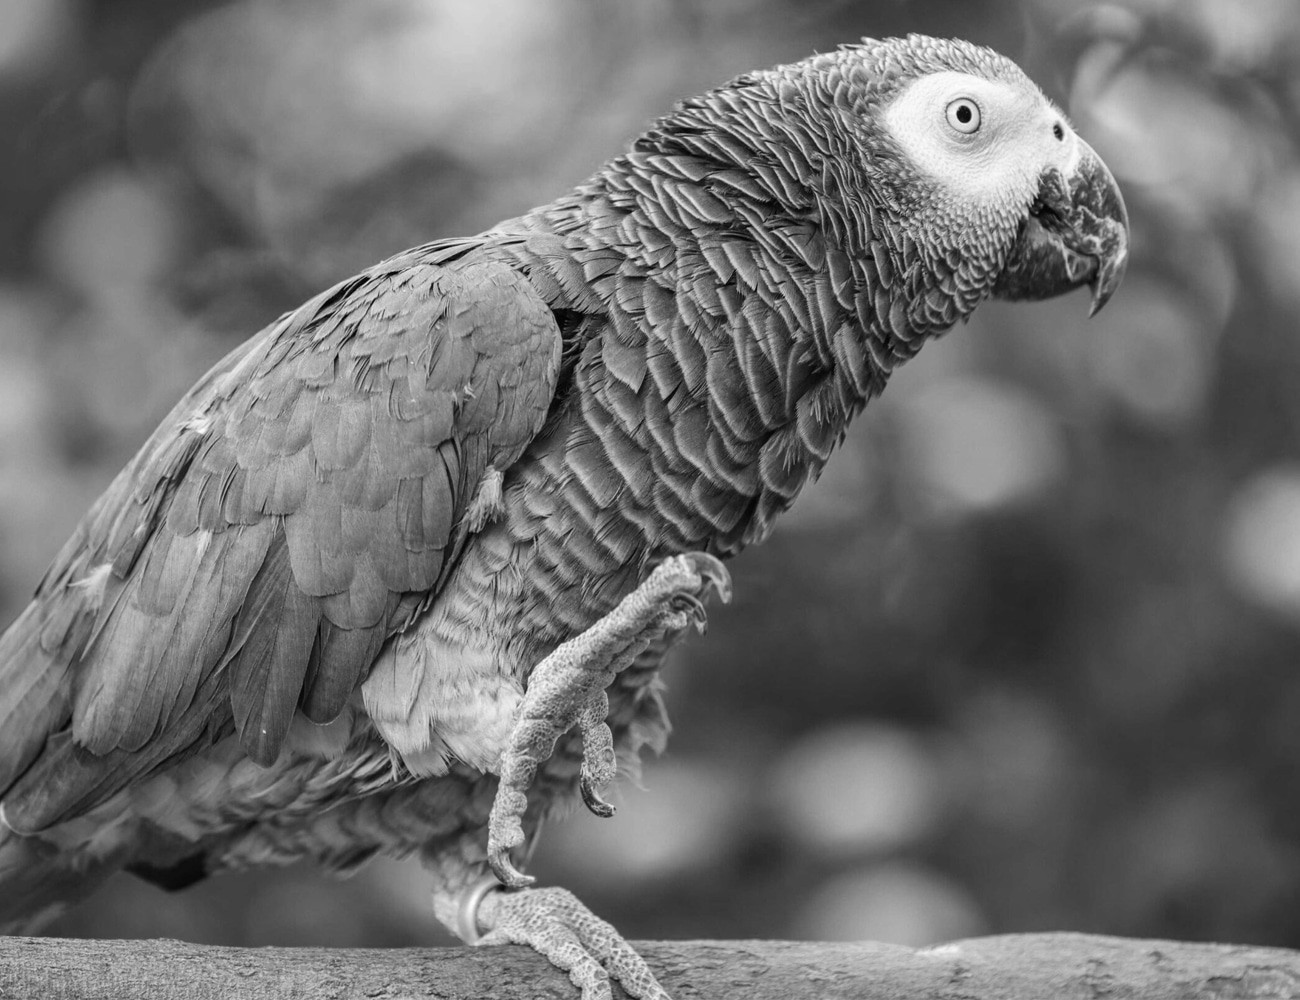 The Africa Grey Parrot